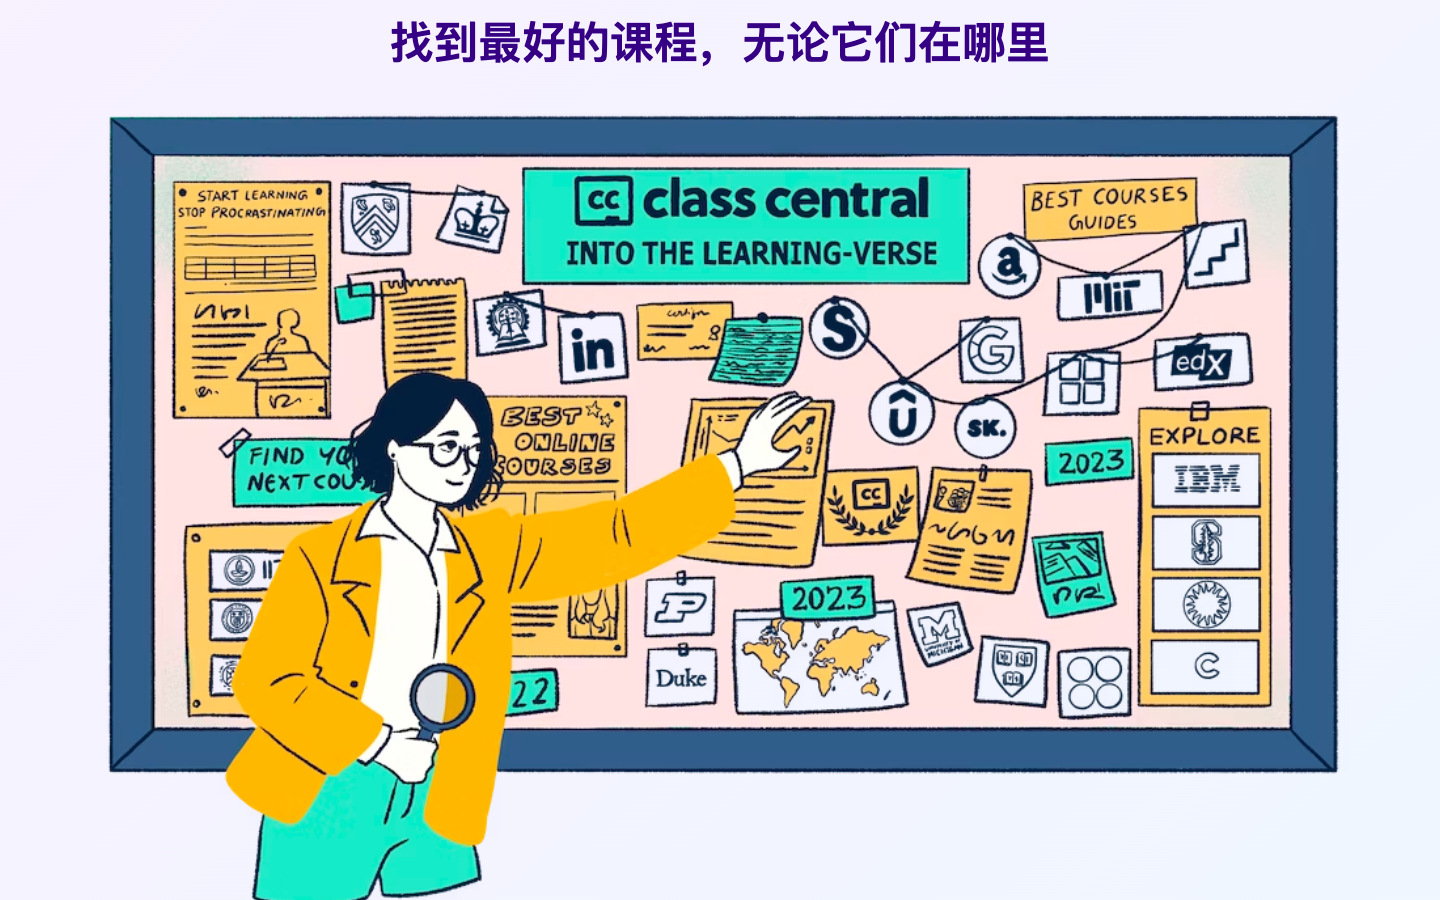 Classcentral 慕课检索